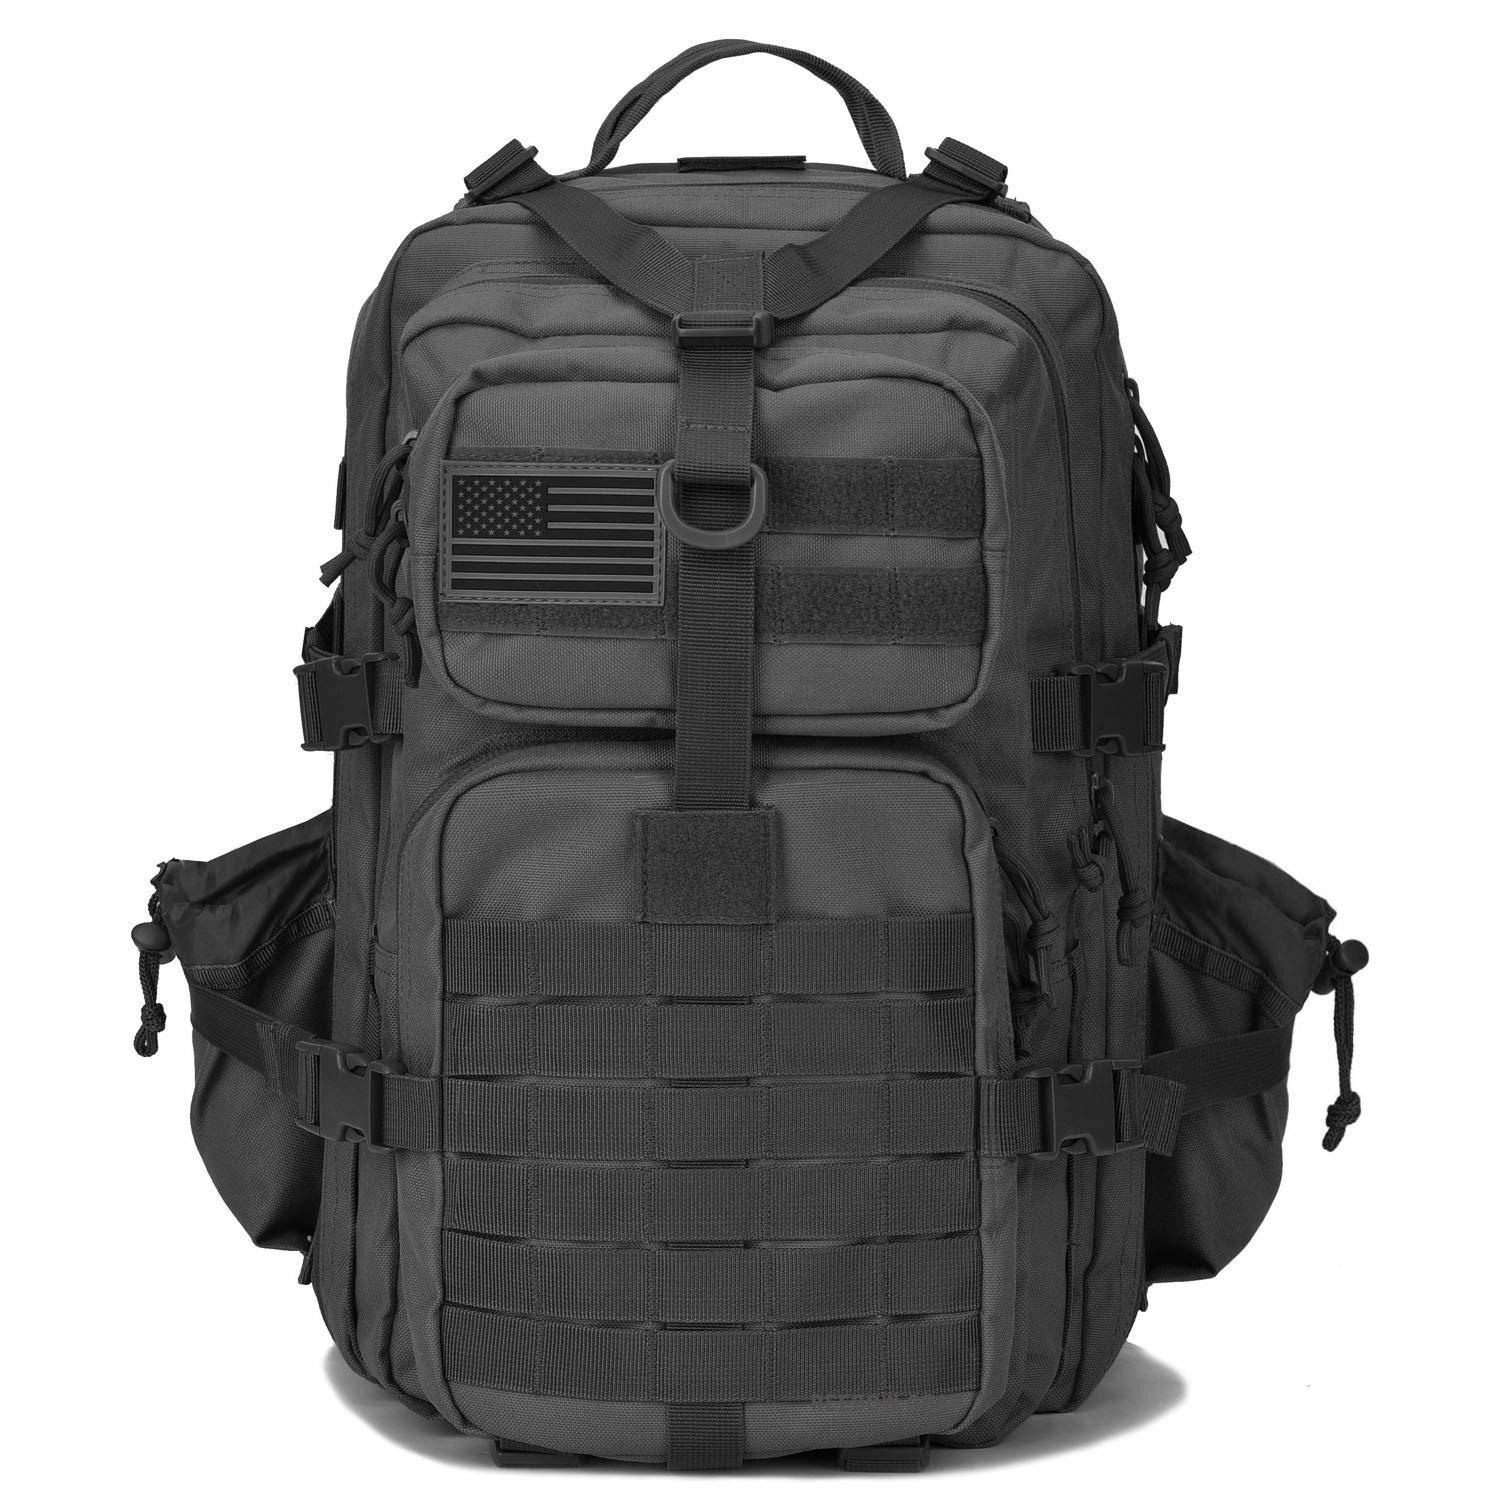 BOW-TAC tactical backpacks - Black 34L molle bug out backpack - Front view